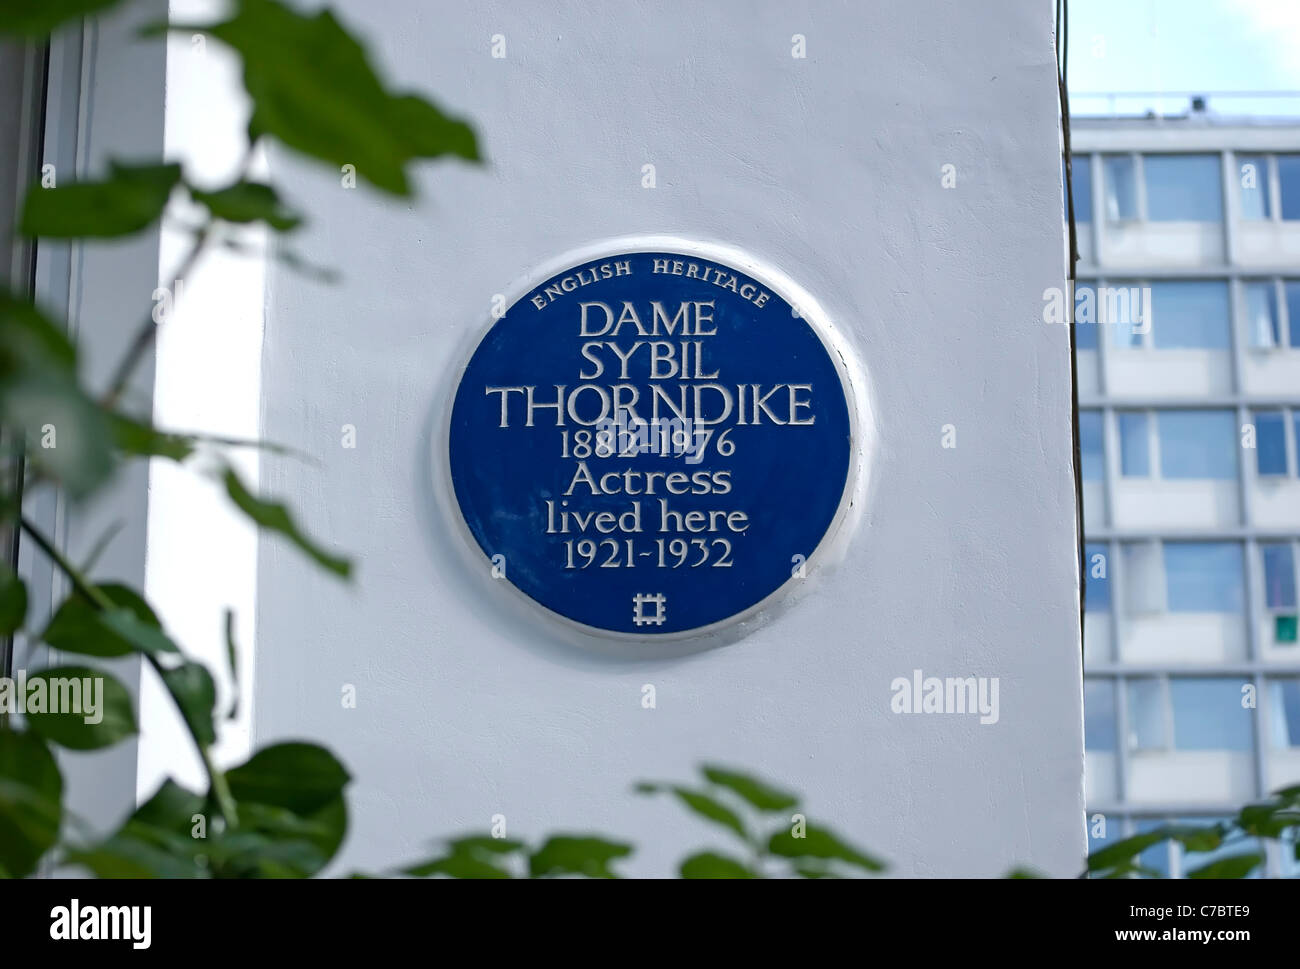 english heritage blue plaque marking a home of actress dame sybil thorndike, chelsea, london, england Stock Photo